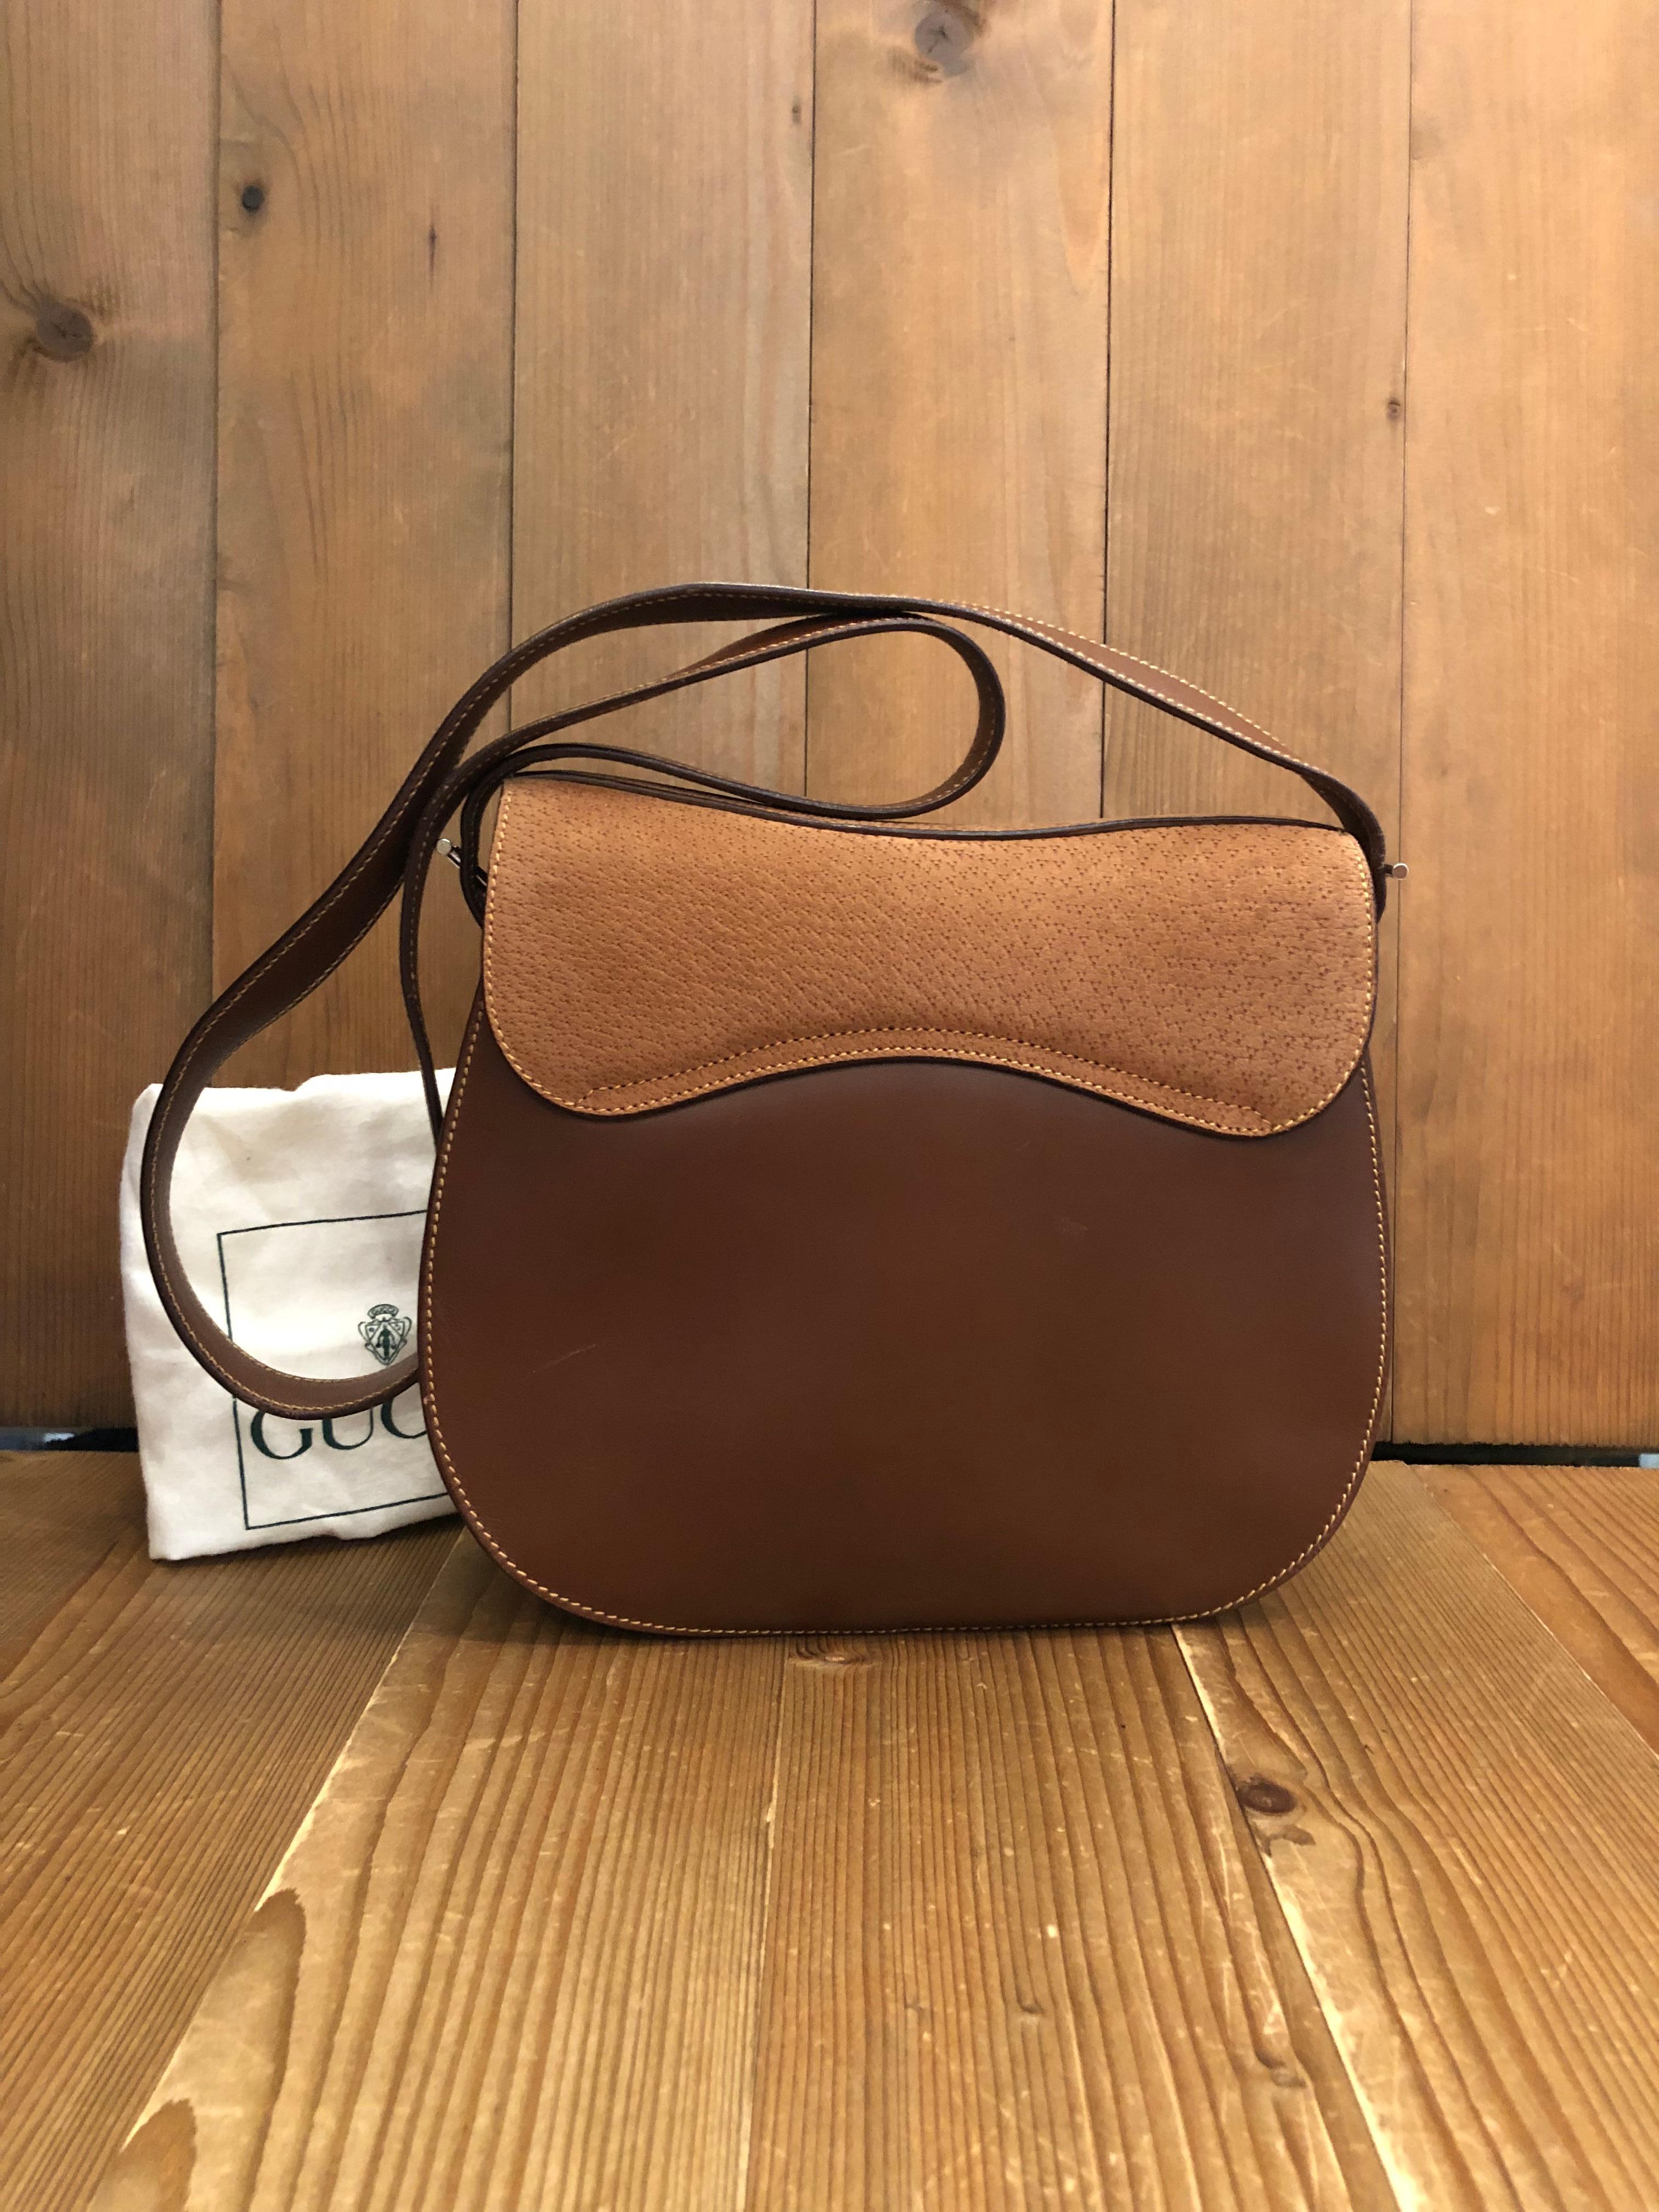 This vintage GUCCI mini saddle bag is crafted of smooth calf leather and nubuck in brown and silver toned hardware. Front magnetic snap closure opens to a brown suede interior featuring a zippered pocket. Made in Italy. Measures approximately 9 x 8